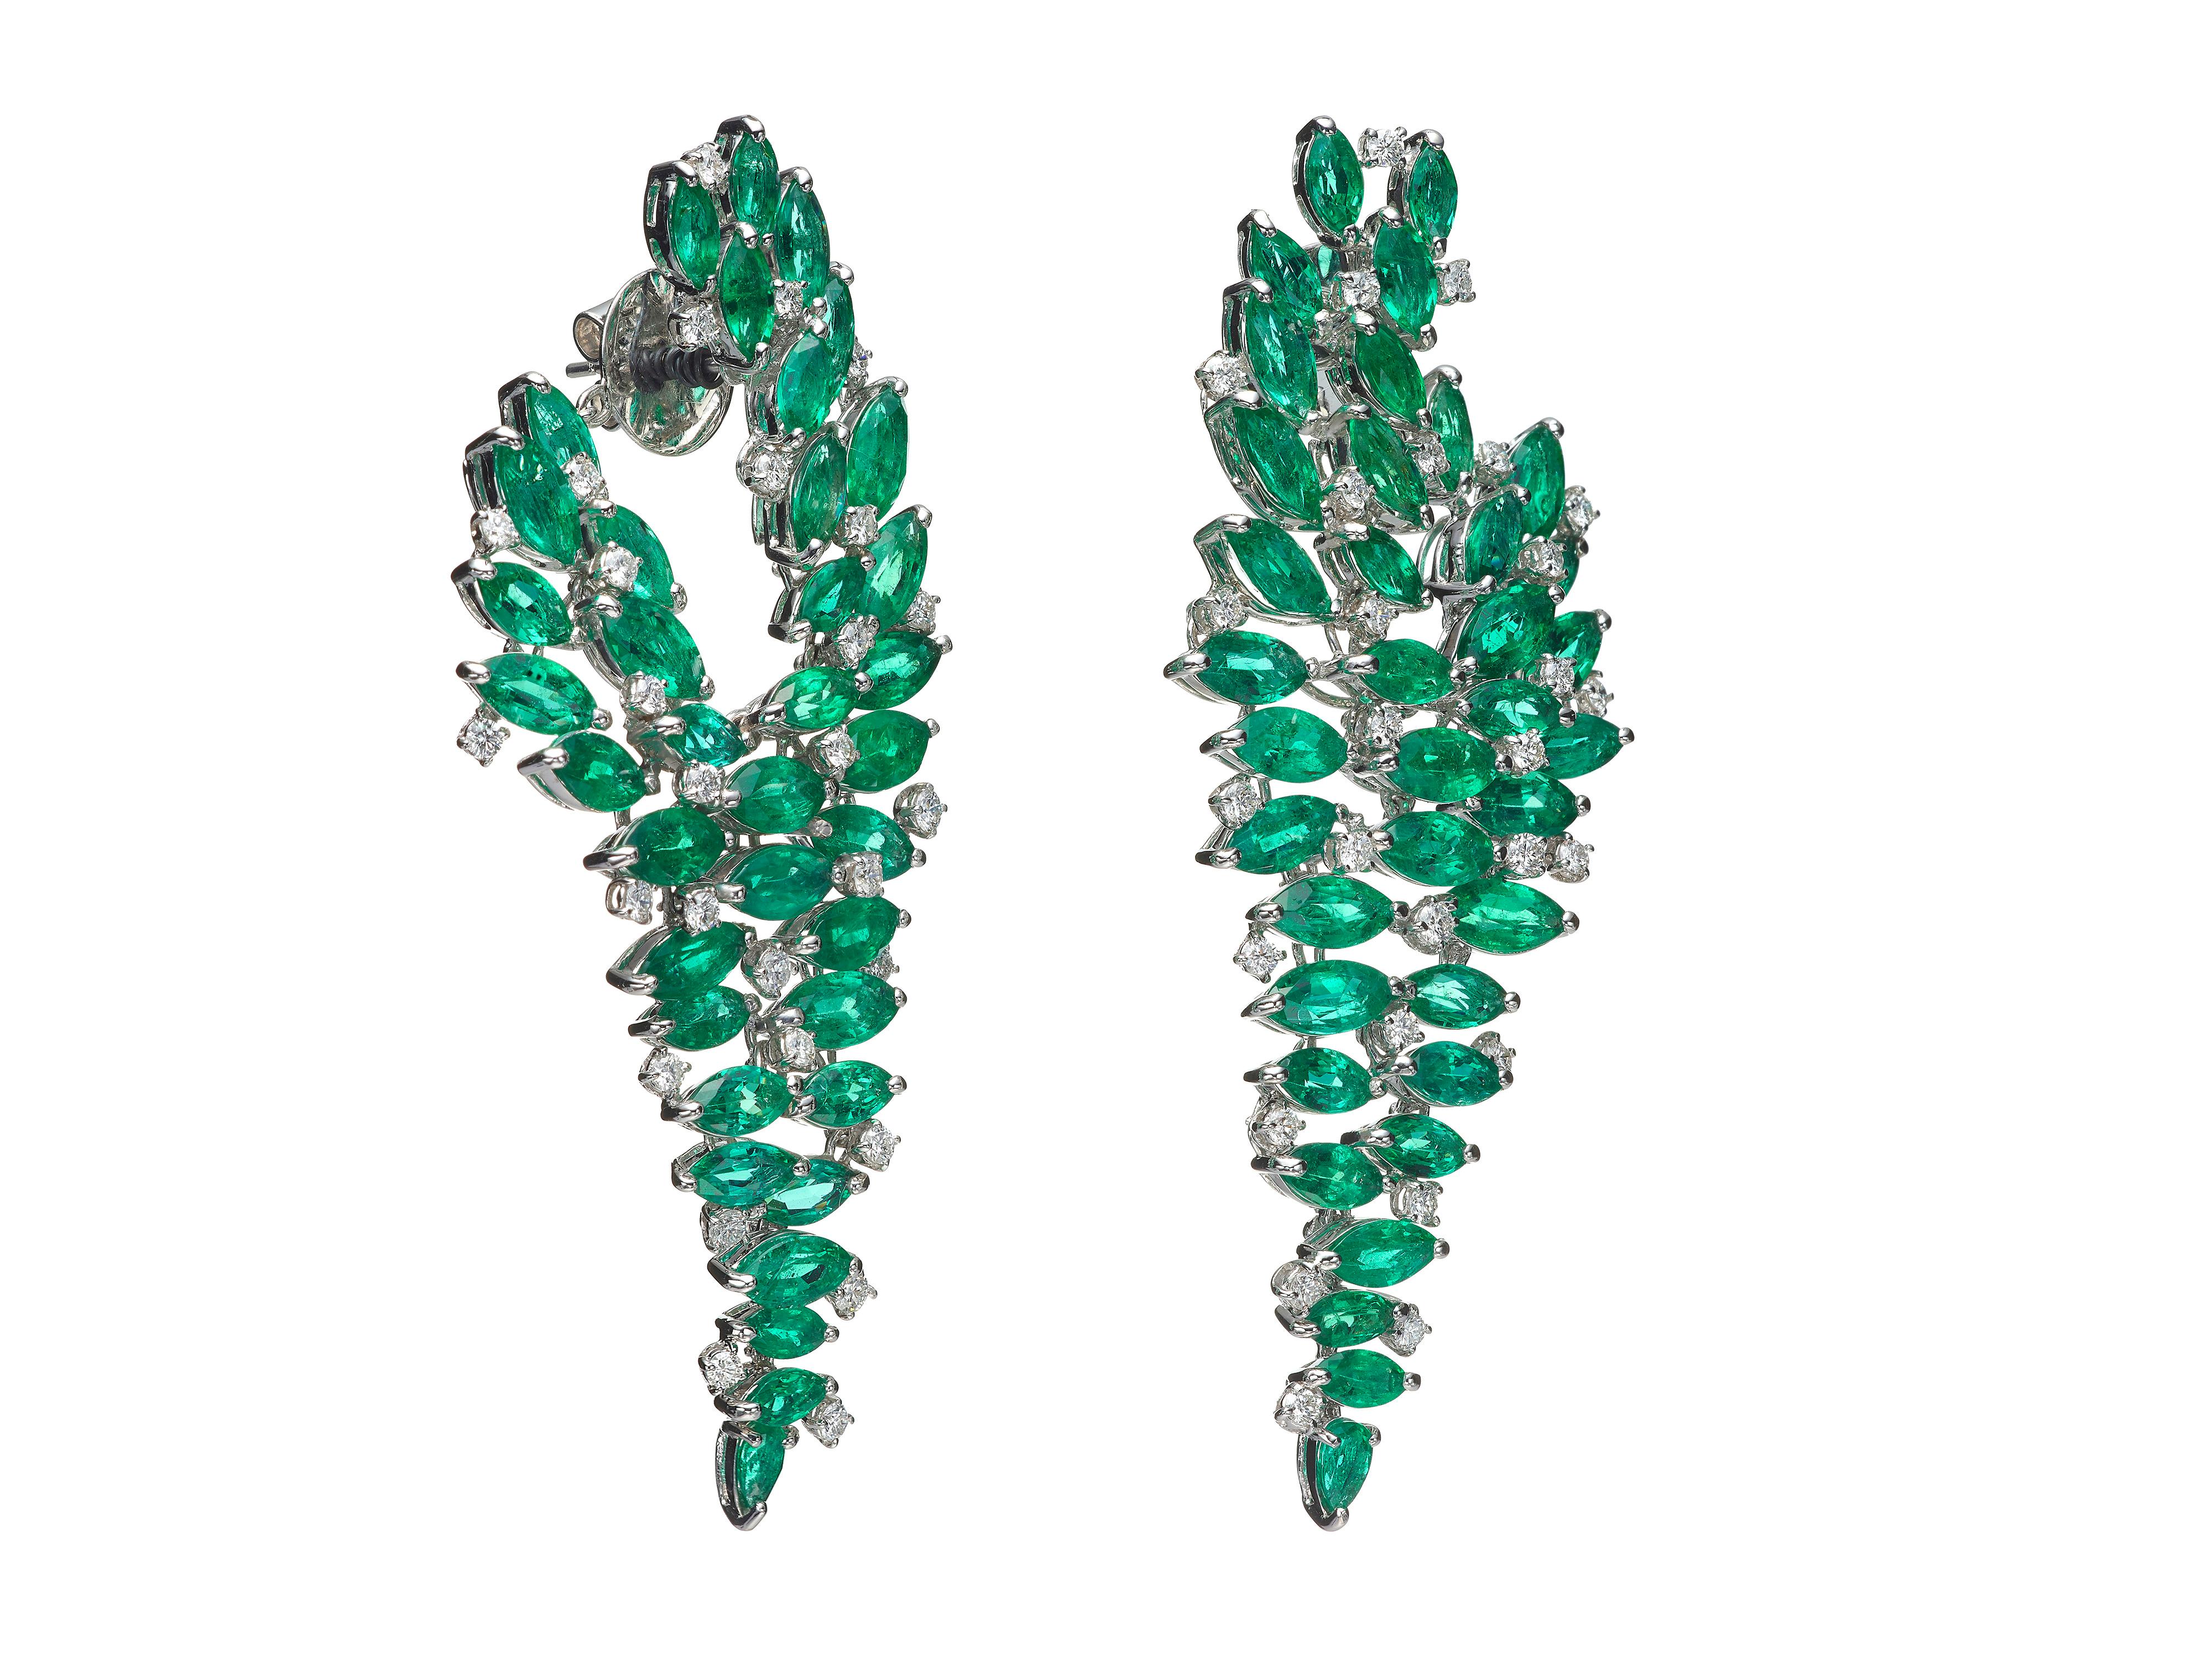 Defined by its firework assortment of striking green marquise and pear shape emeralds, these statement chandelier earrings are encrusted in a three-dimensional drop setting that hits below the jaw.  

Composition:
18K White Gold
2 Pear Emeralds: